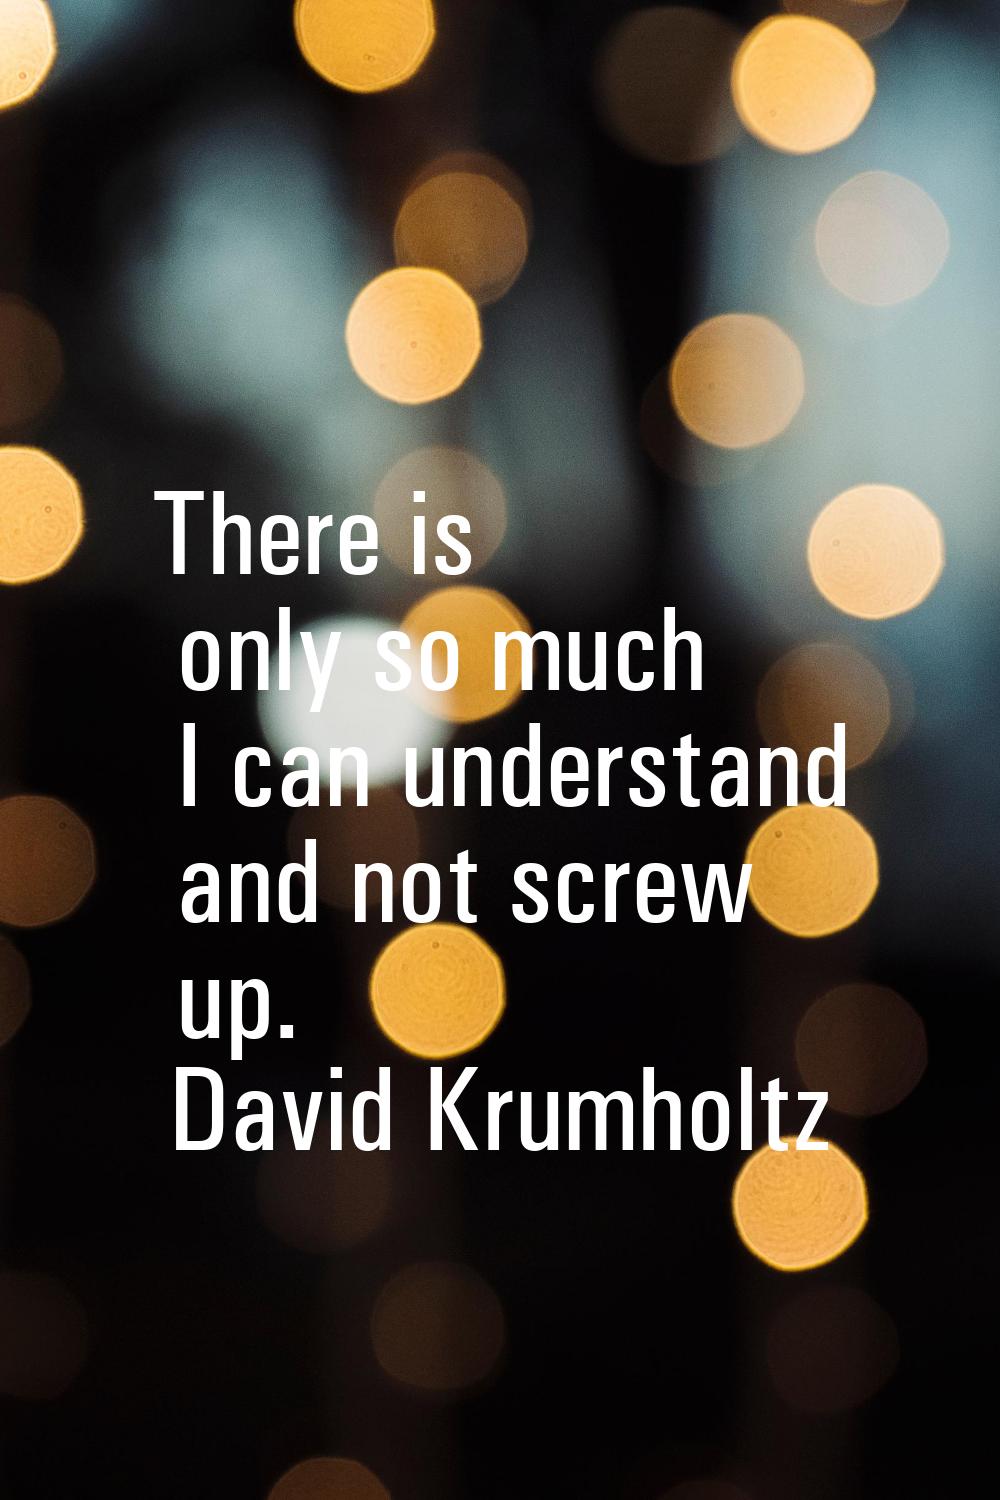 There is only so much I can understand and not screw up.